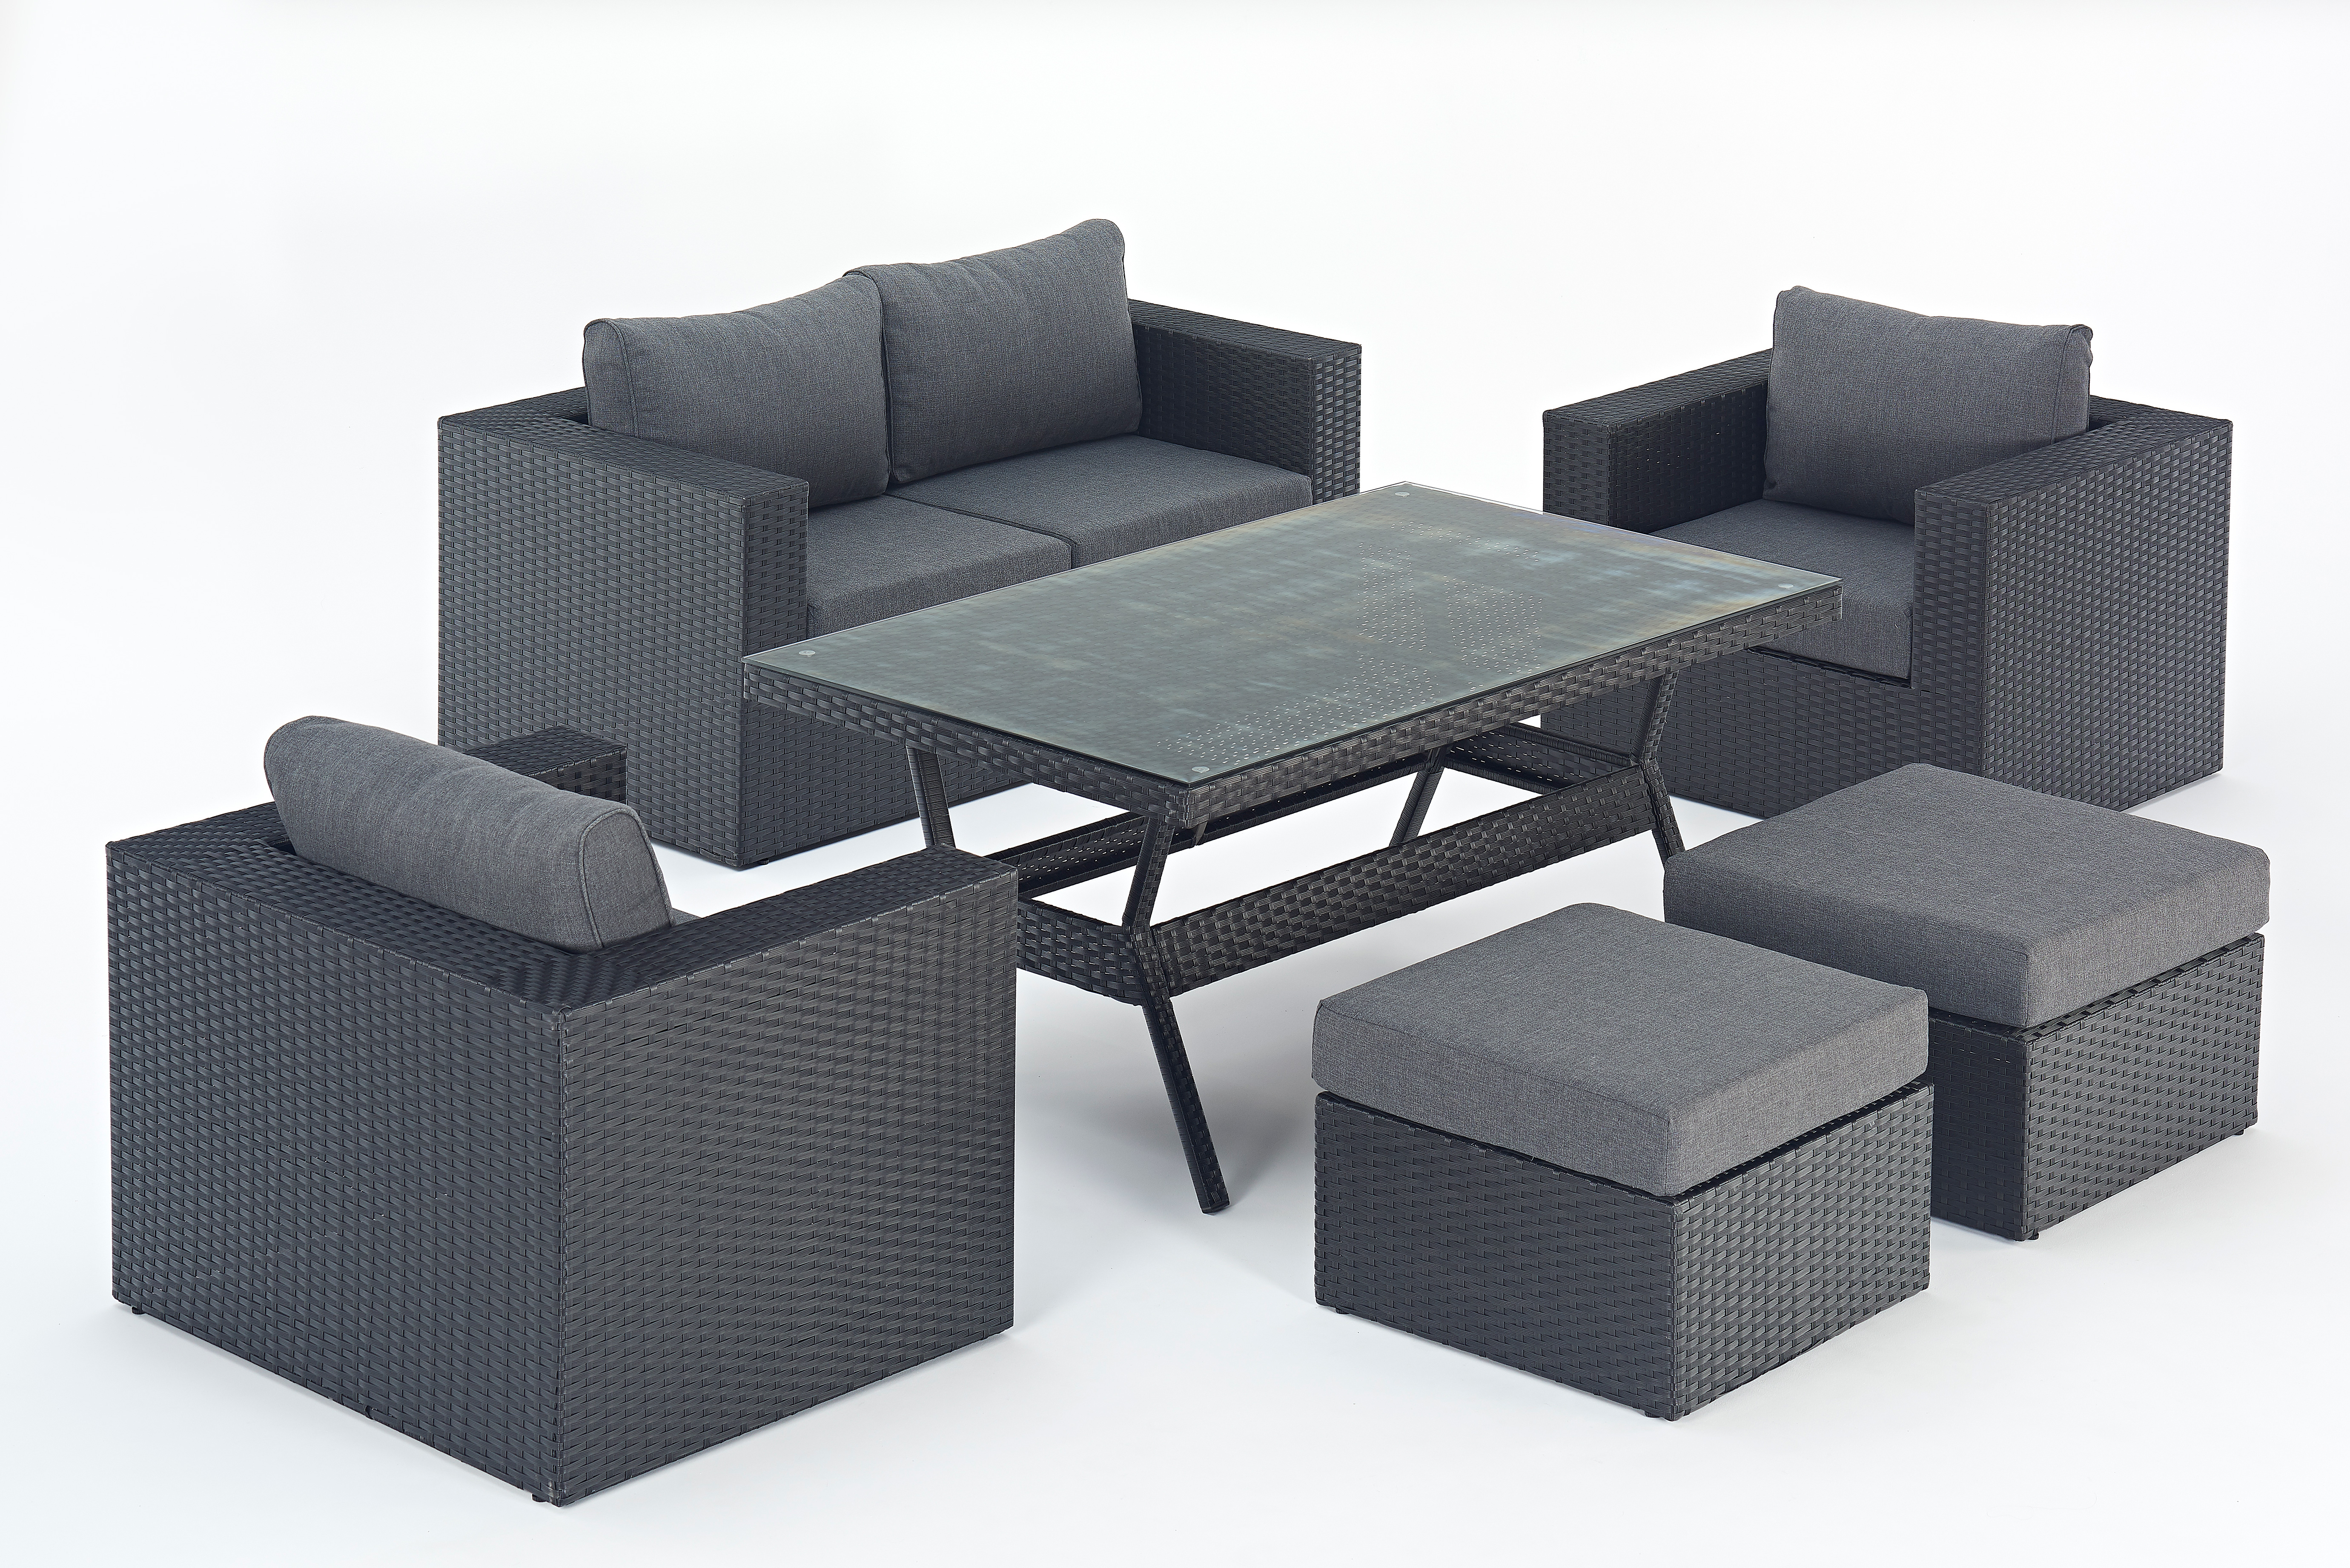 Prestige Sofa Table Set Rattan Outdoor Living Garden Furniture with size 5520 X 3684